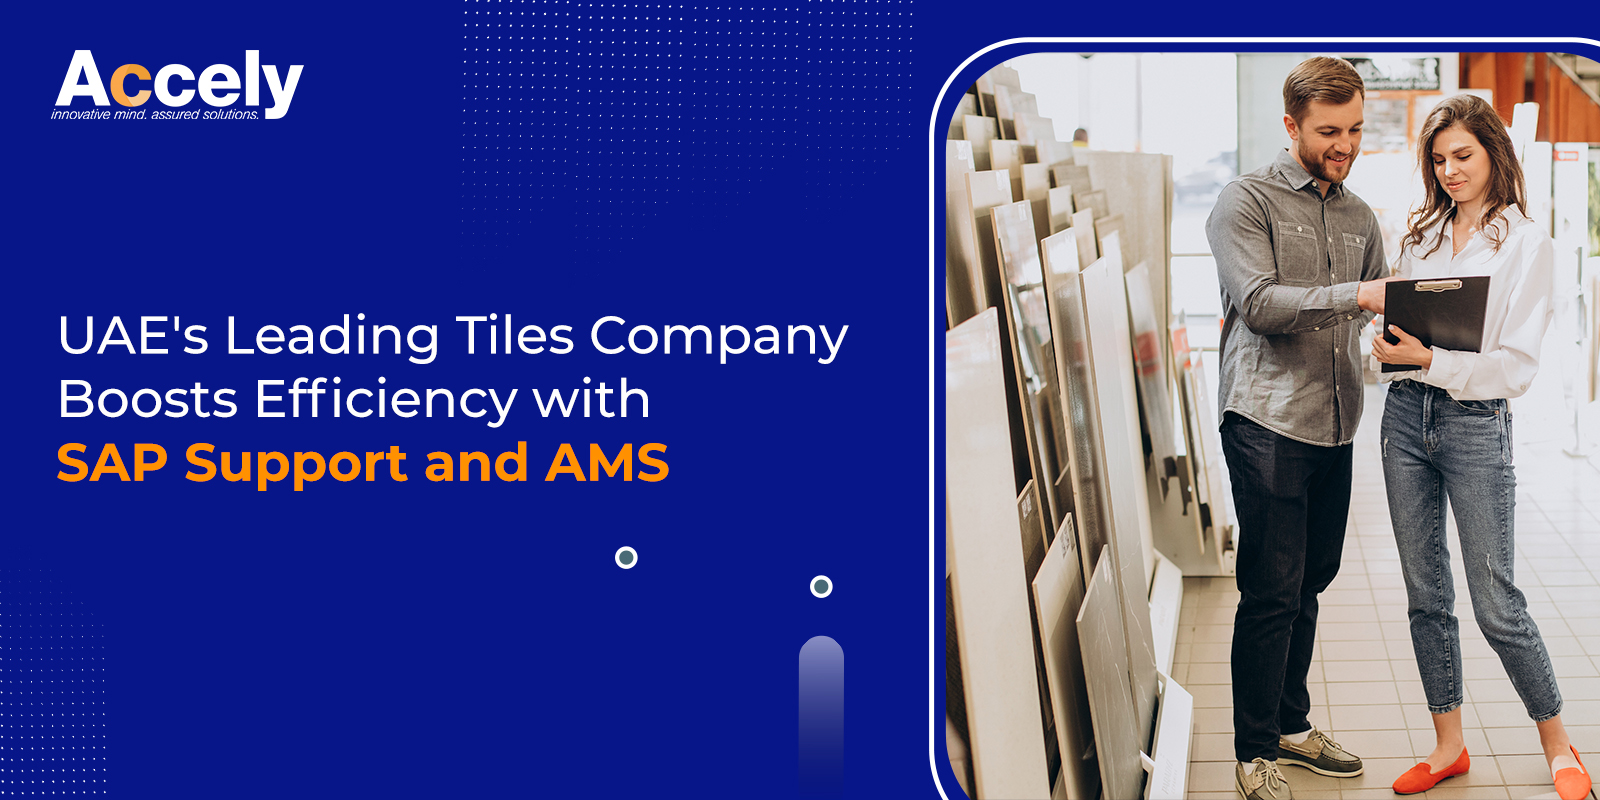 UAE's Leading Tiles Company Boosts Efficiency with SAP Support and AMS